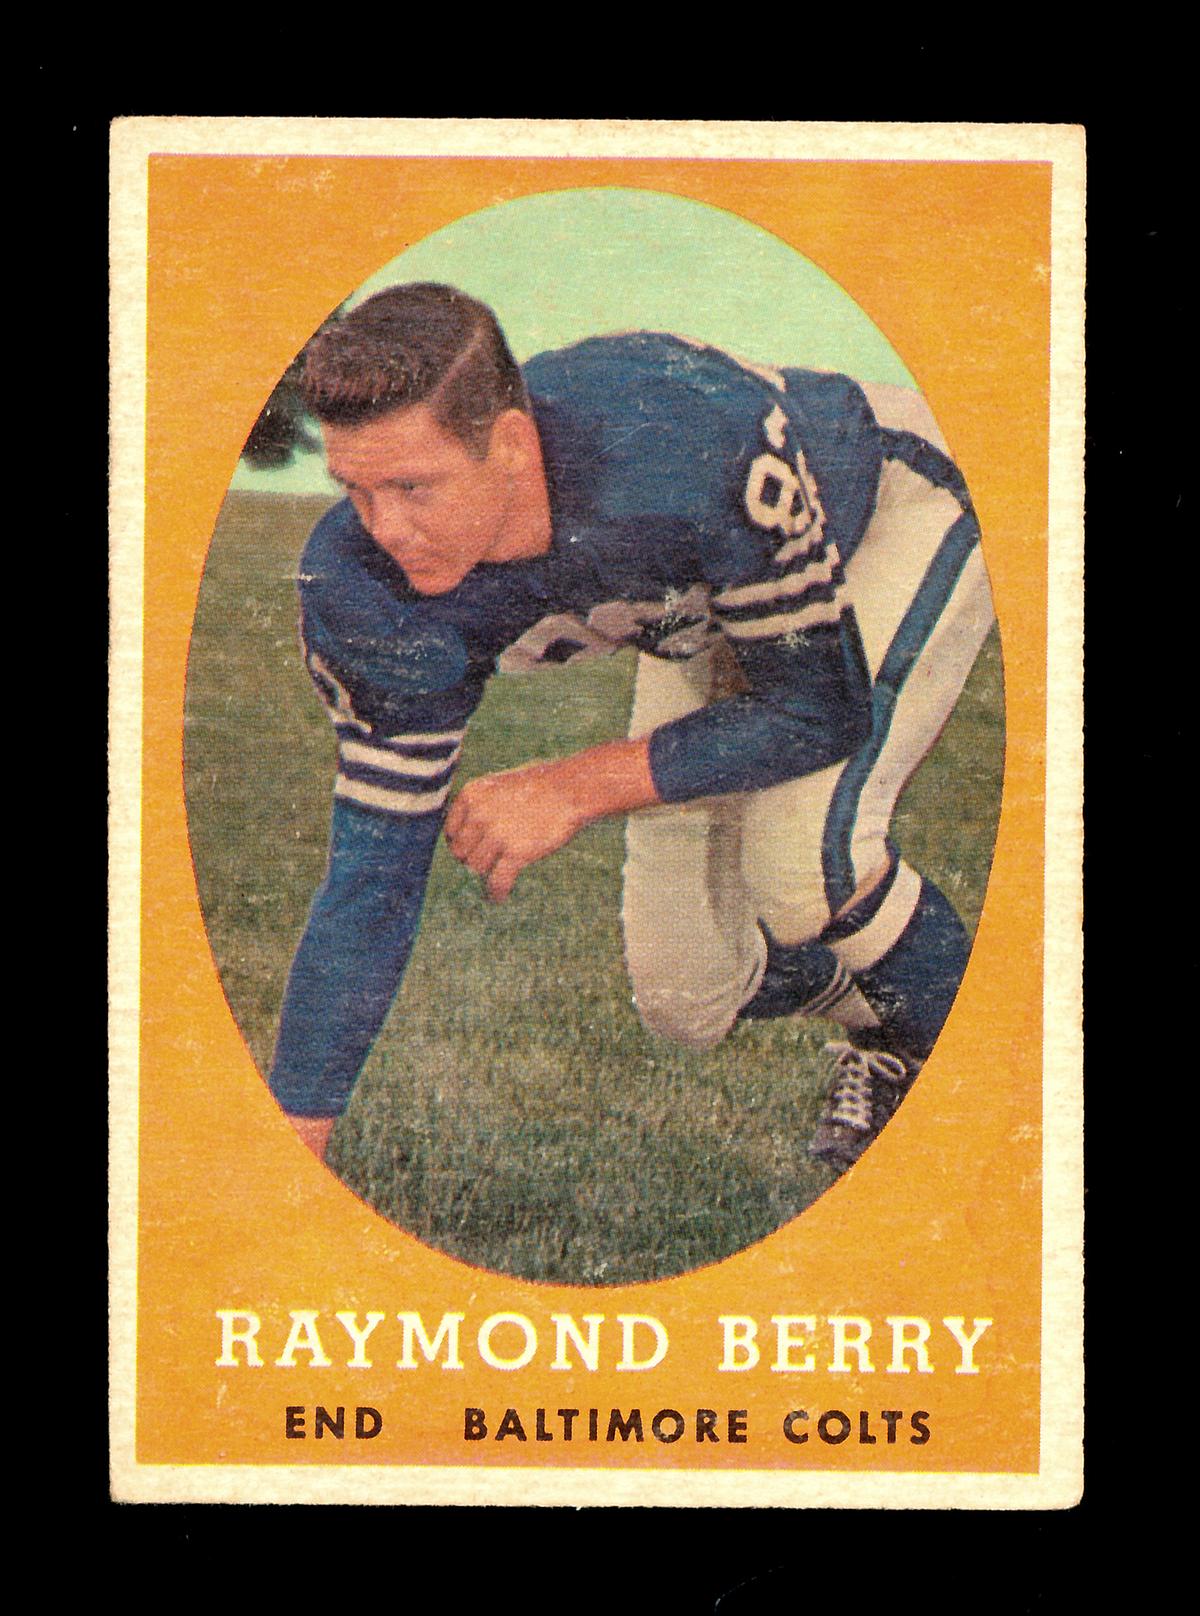 1958 Topps Football Card #120 Hall of Famer Raymond Berry Baltimore Colts.